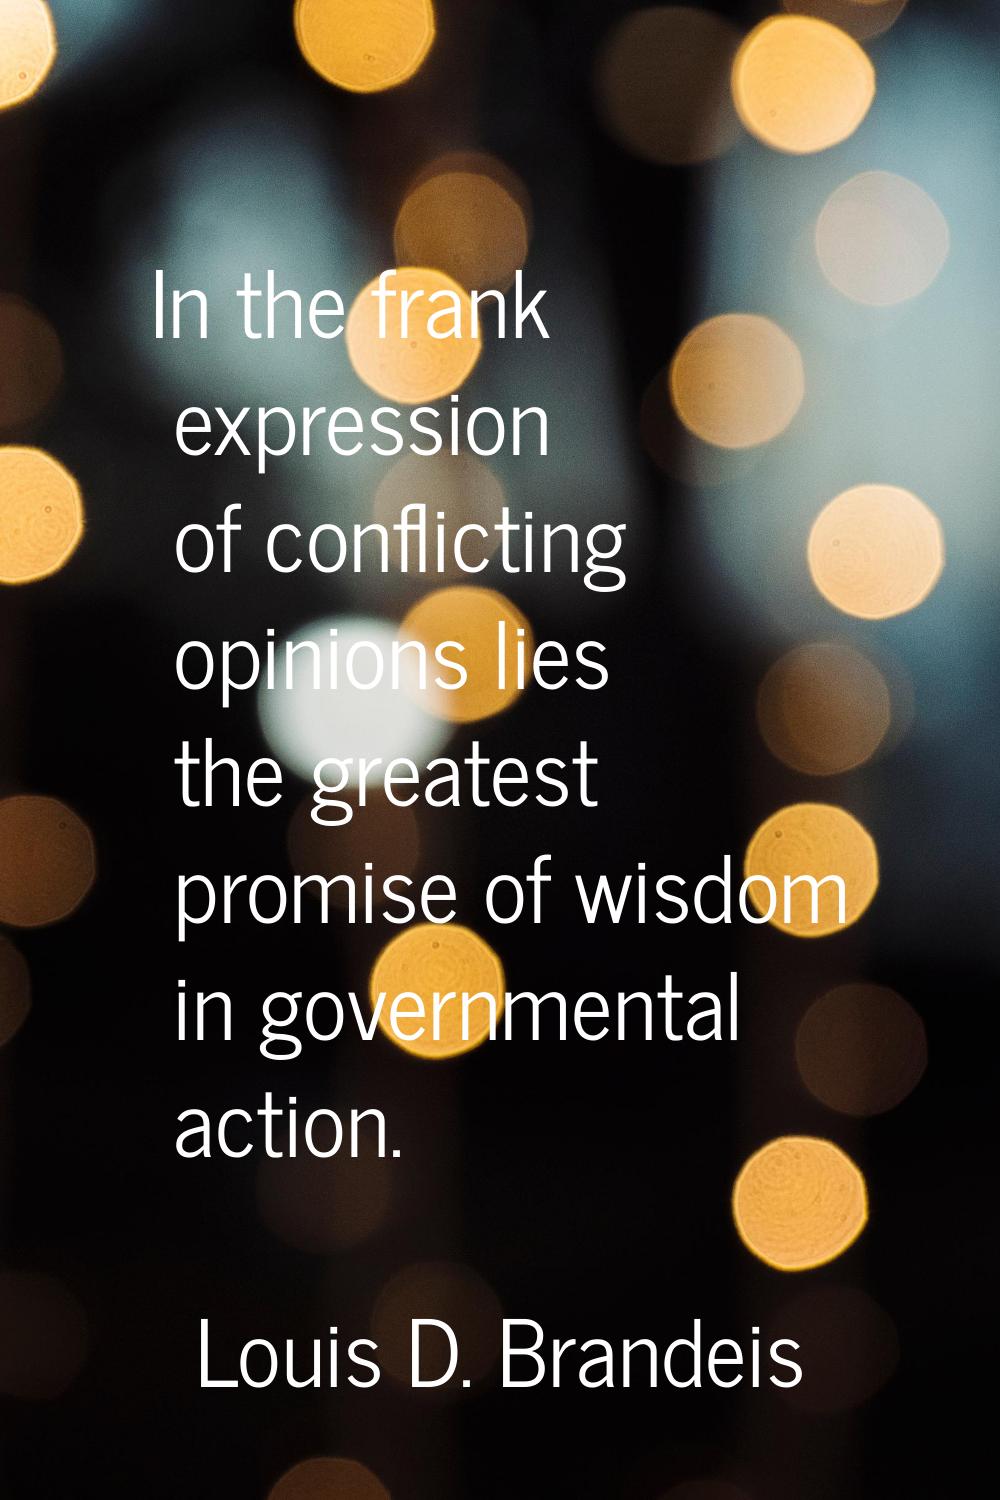 In the frank expression of conflicting opinions lies the greatest promise of wisdom in governmental